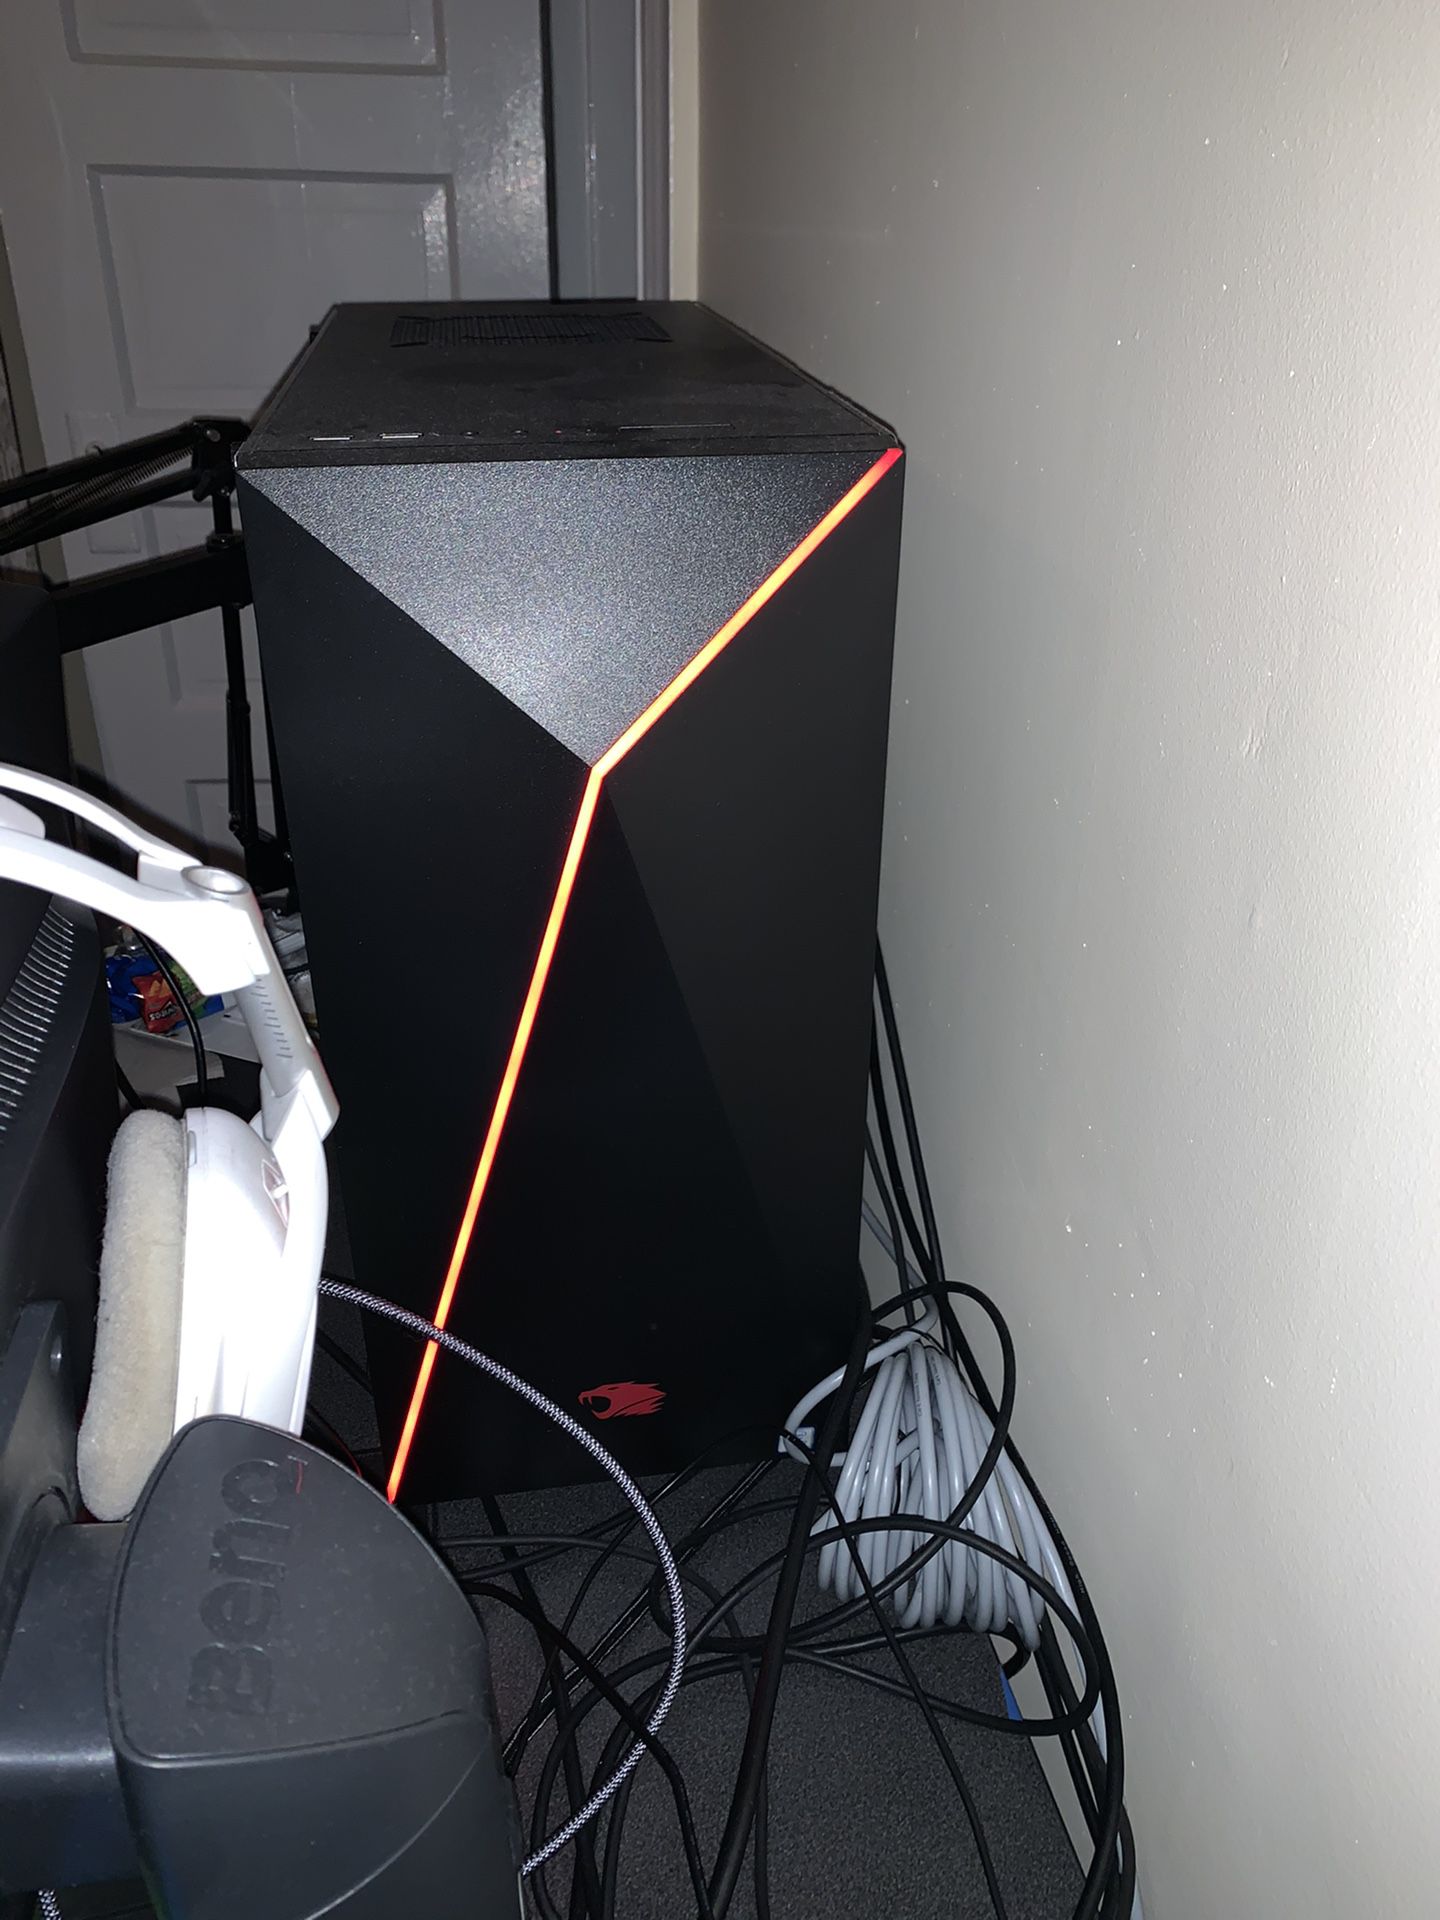 Ibuypower Gaming Pc 650 For Sale In Fairfield Ct Offerup